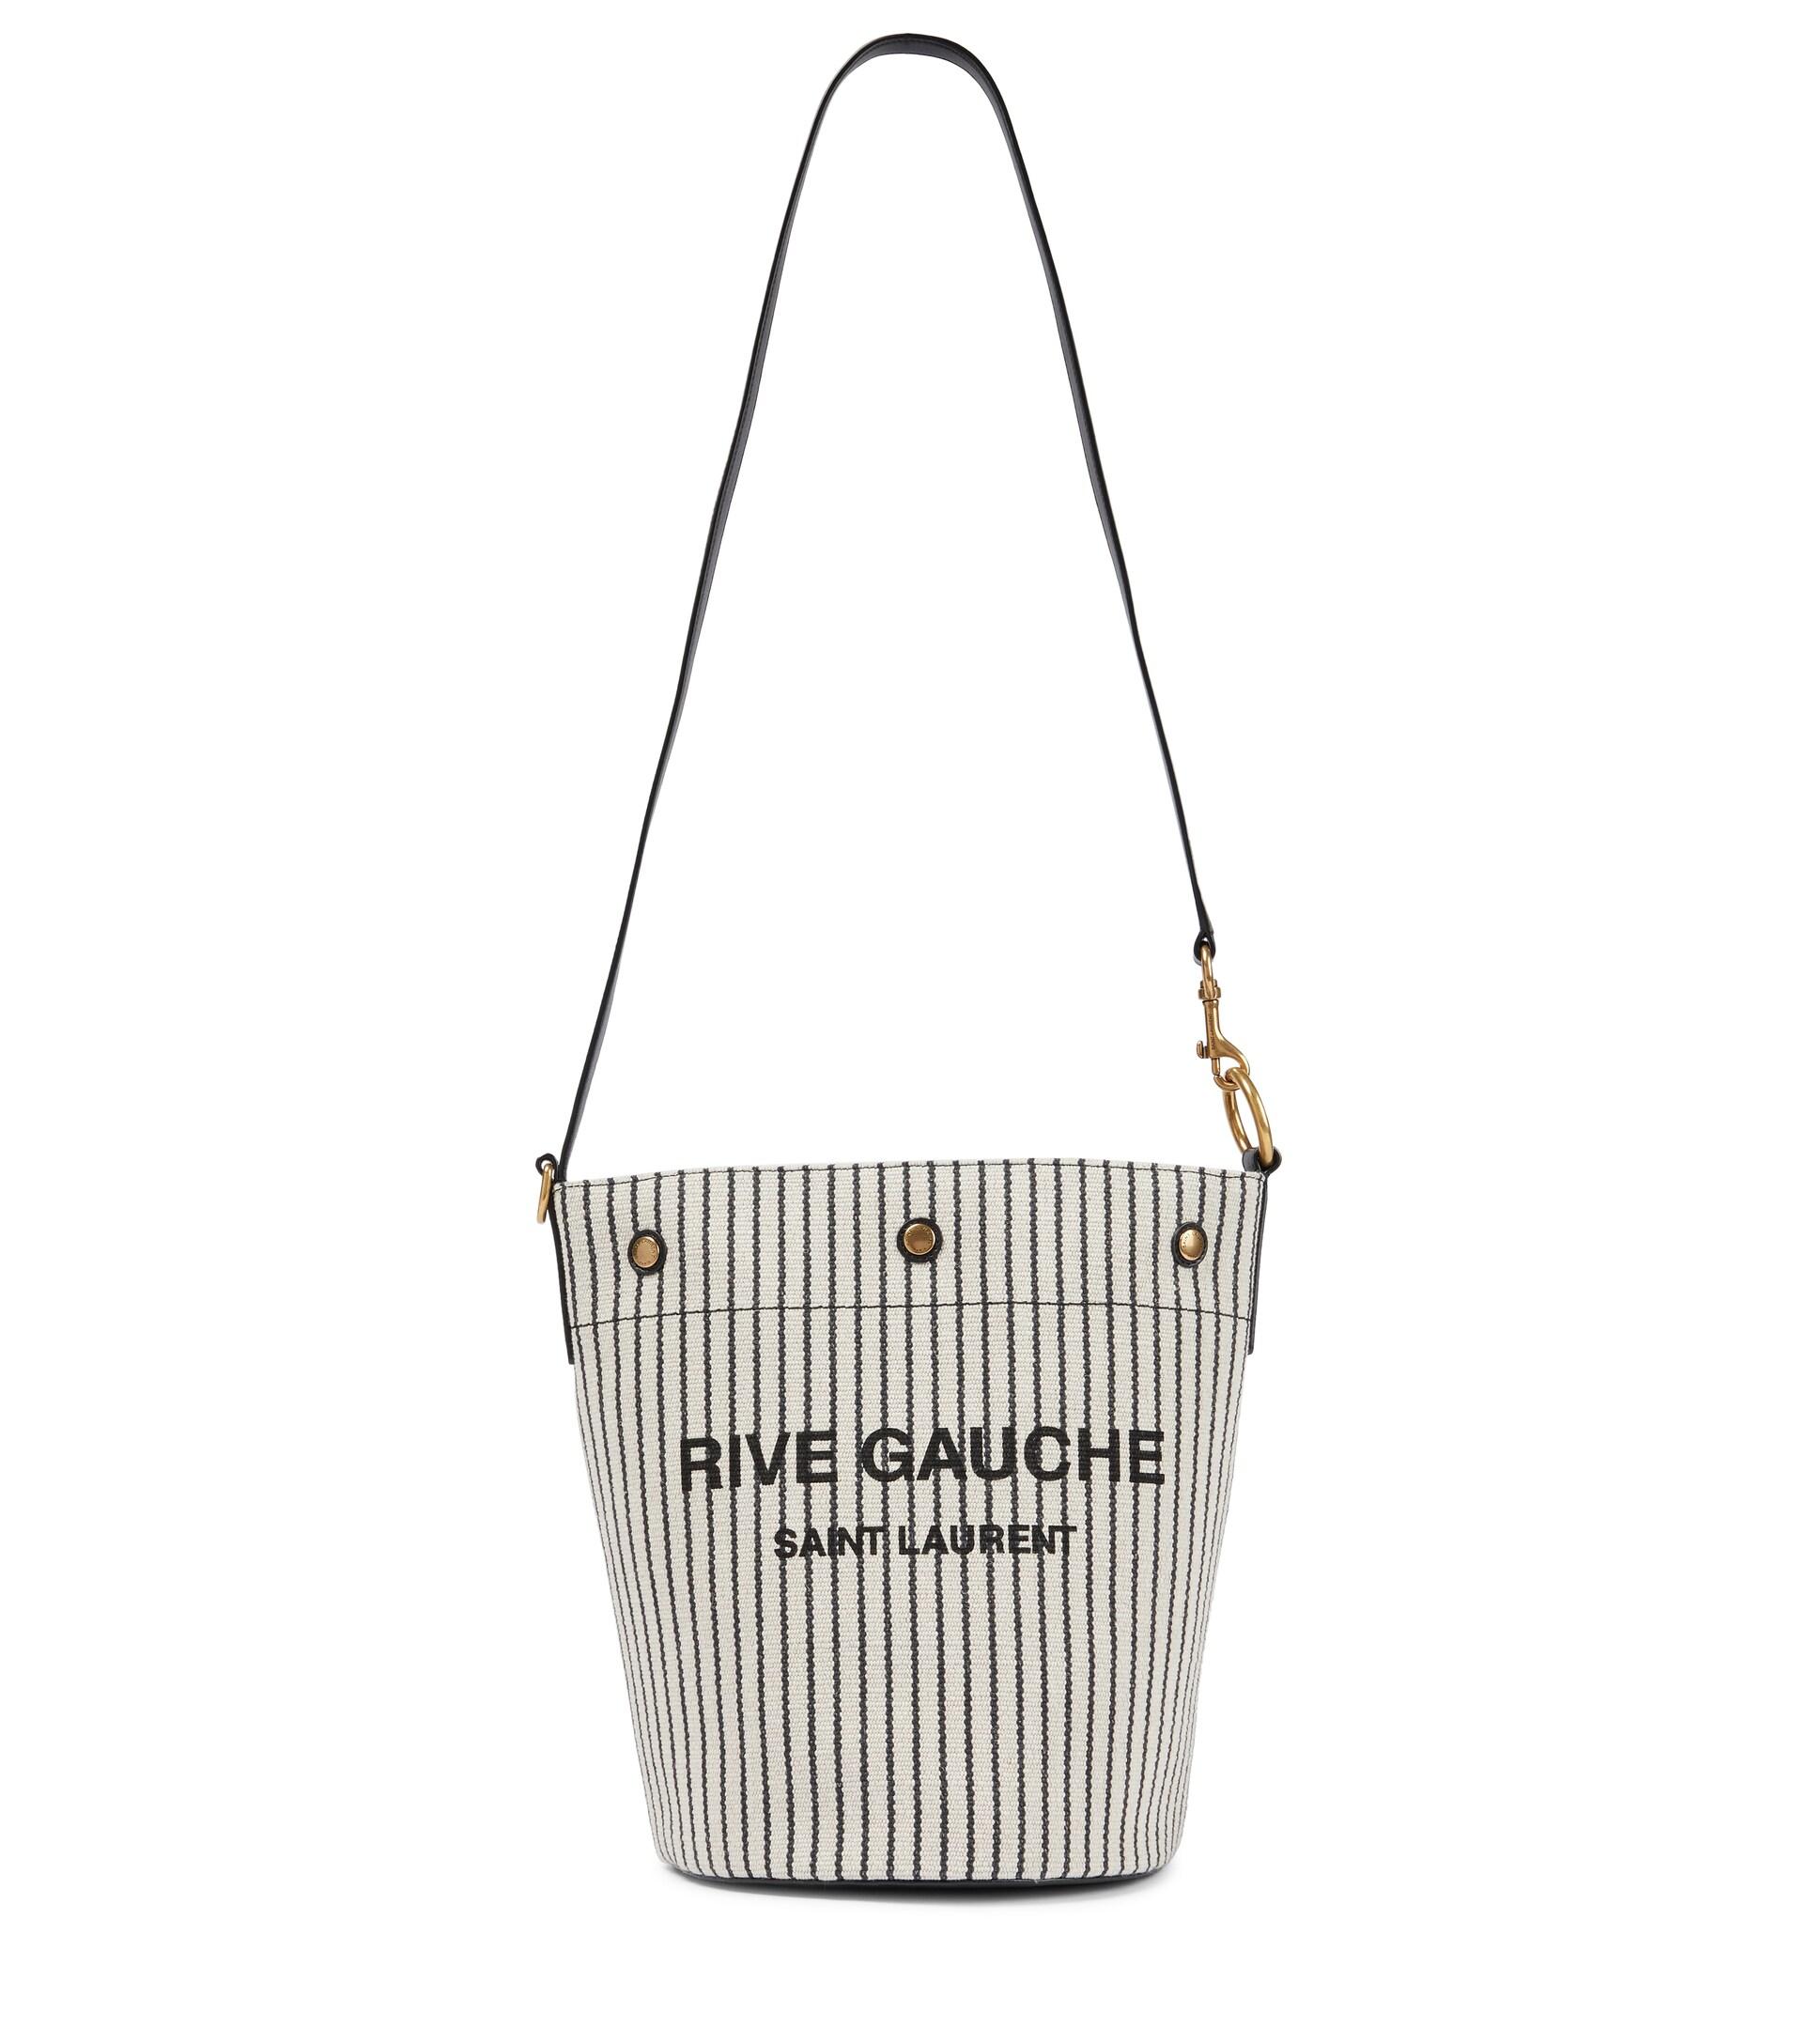 SAINT LAURENT: Rive Gauche recycled canvas with logo bag - Grey